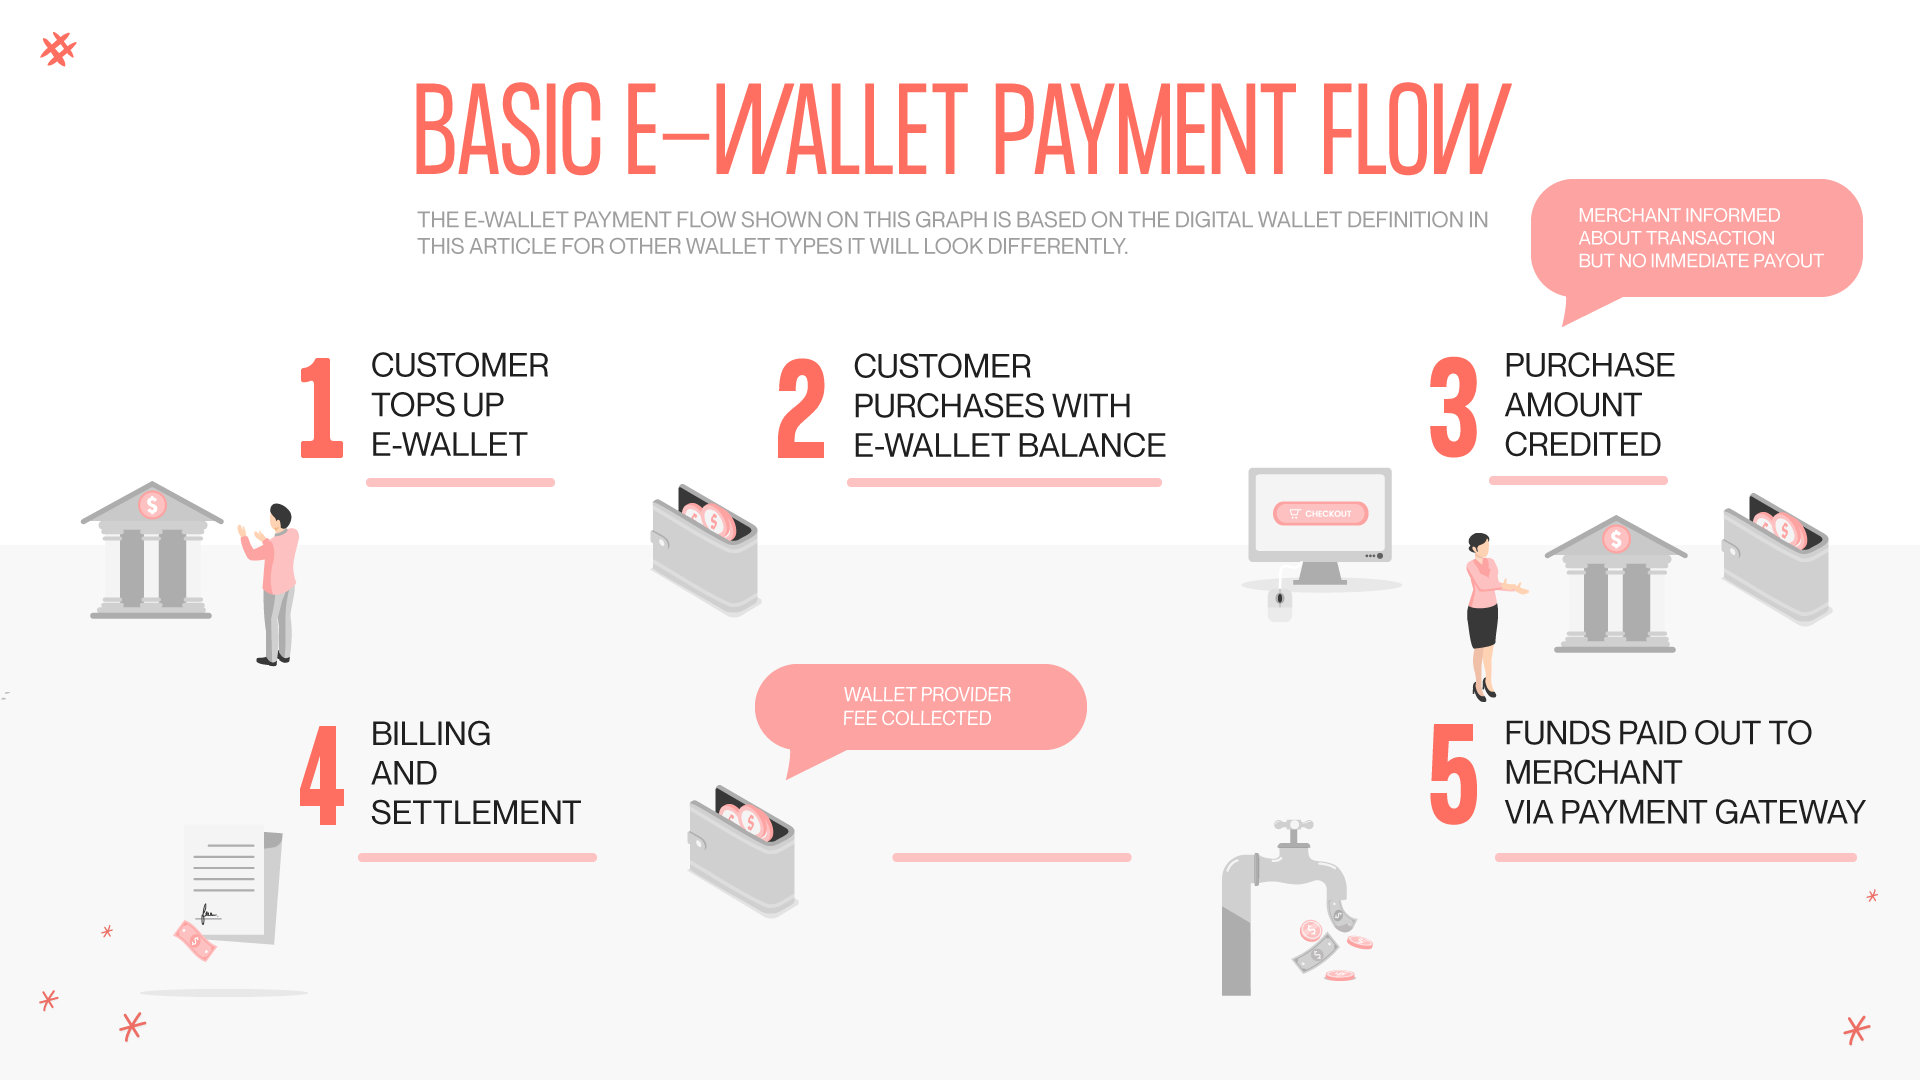 The basic flow of e-wallet payment